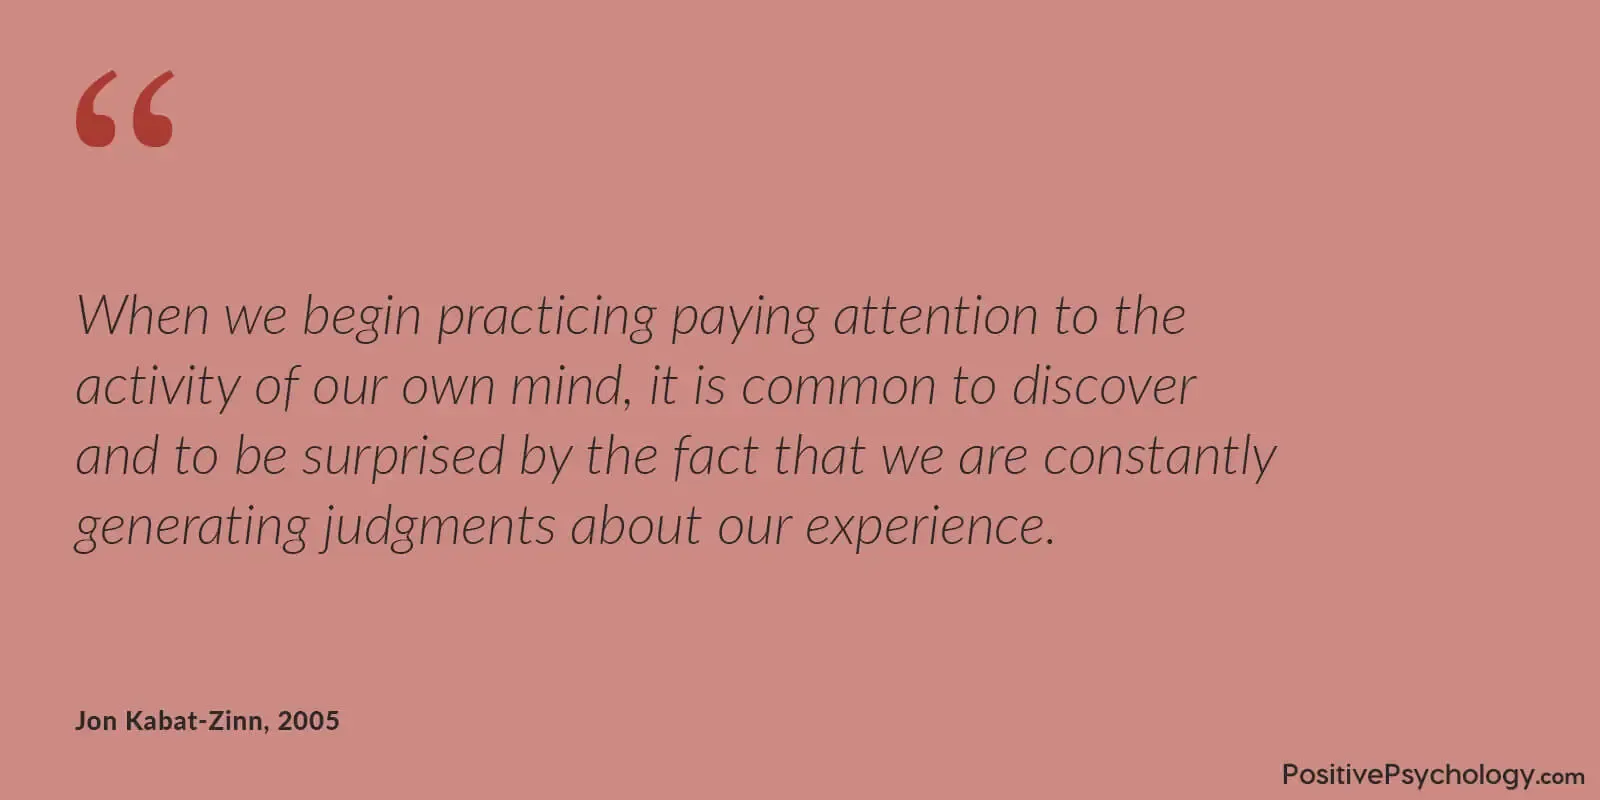 Mindfulness is paying attention